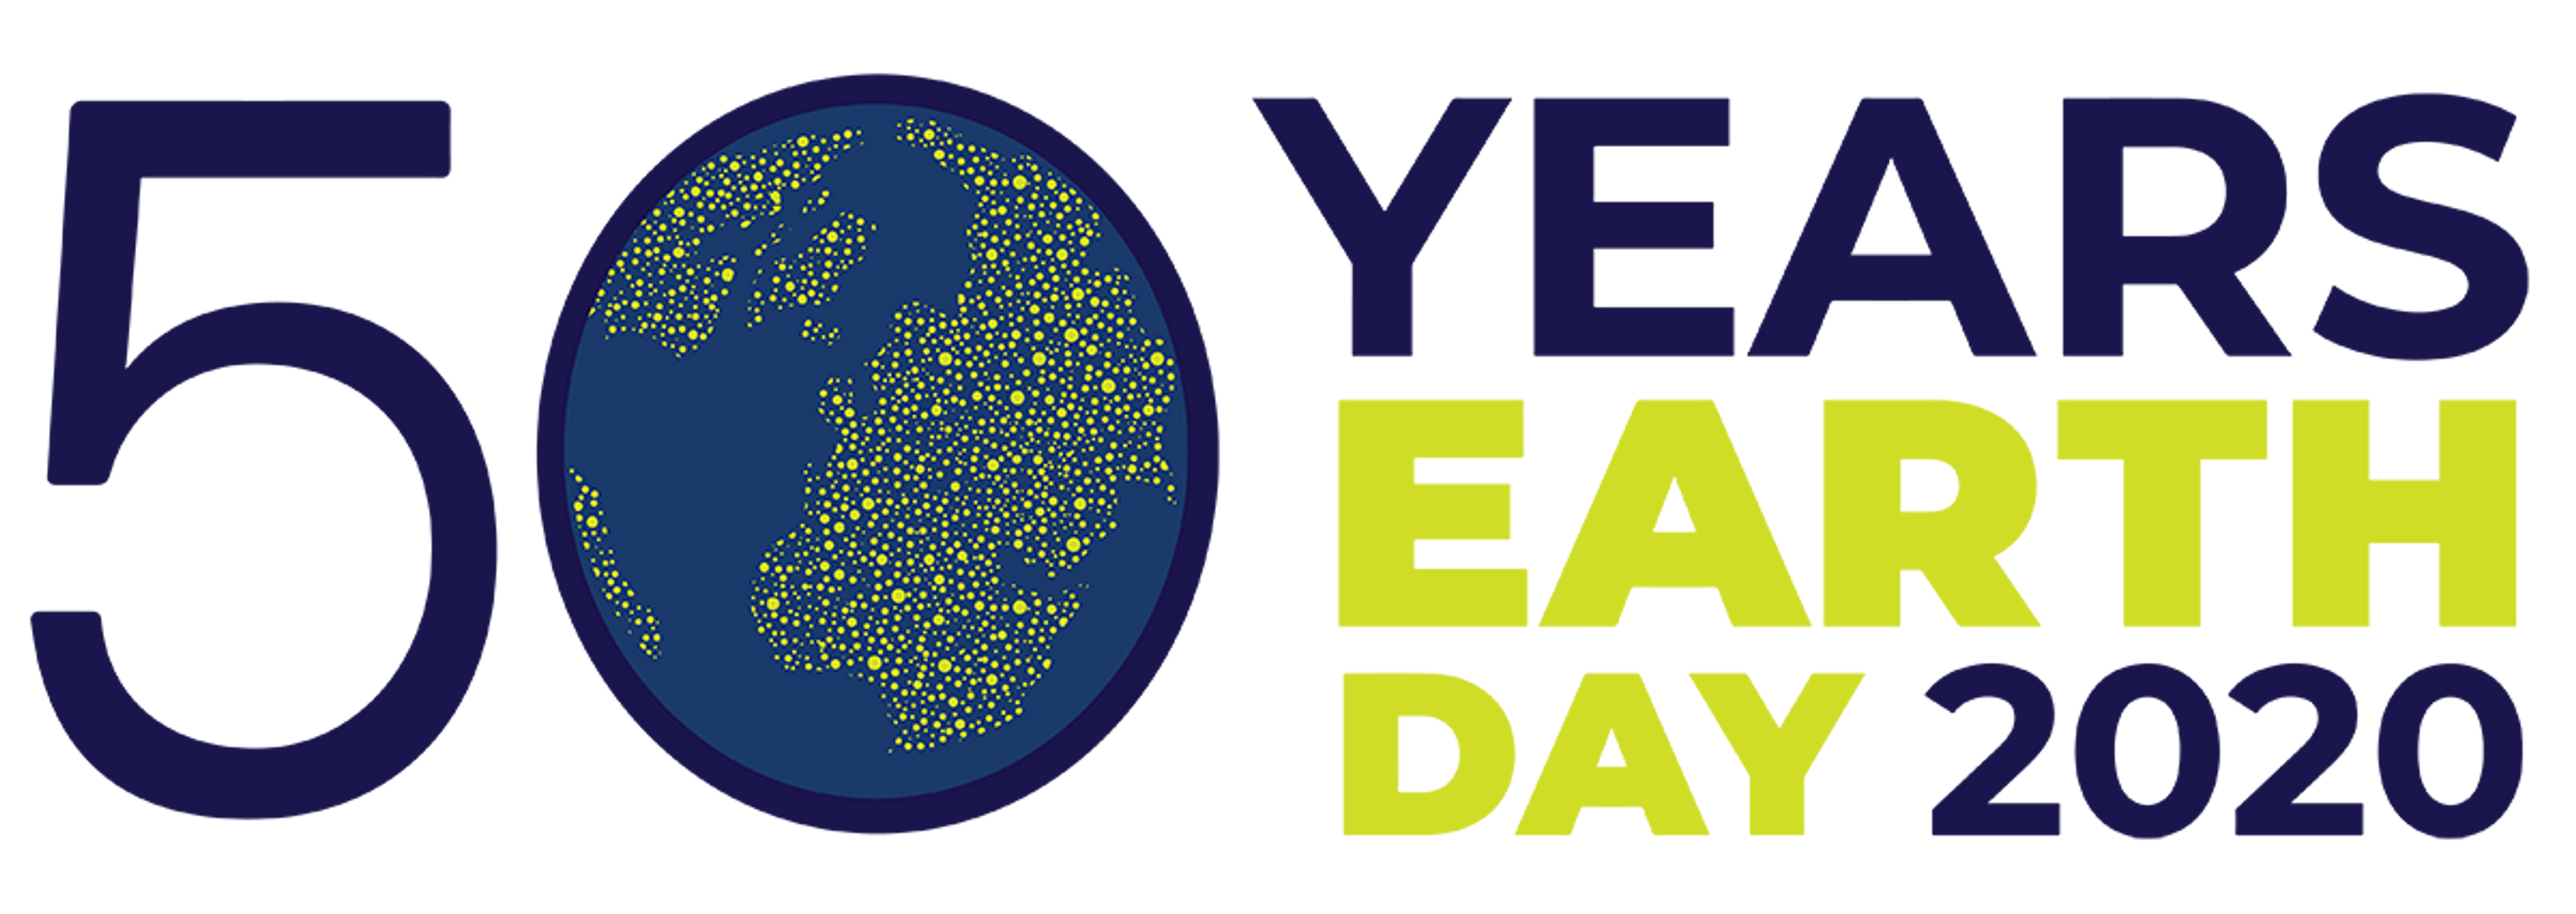 The 50 years of earth day 2020 logo